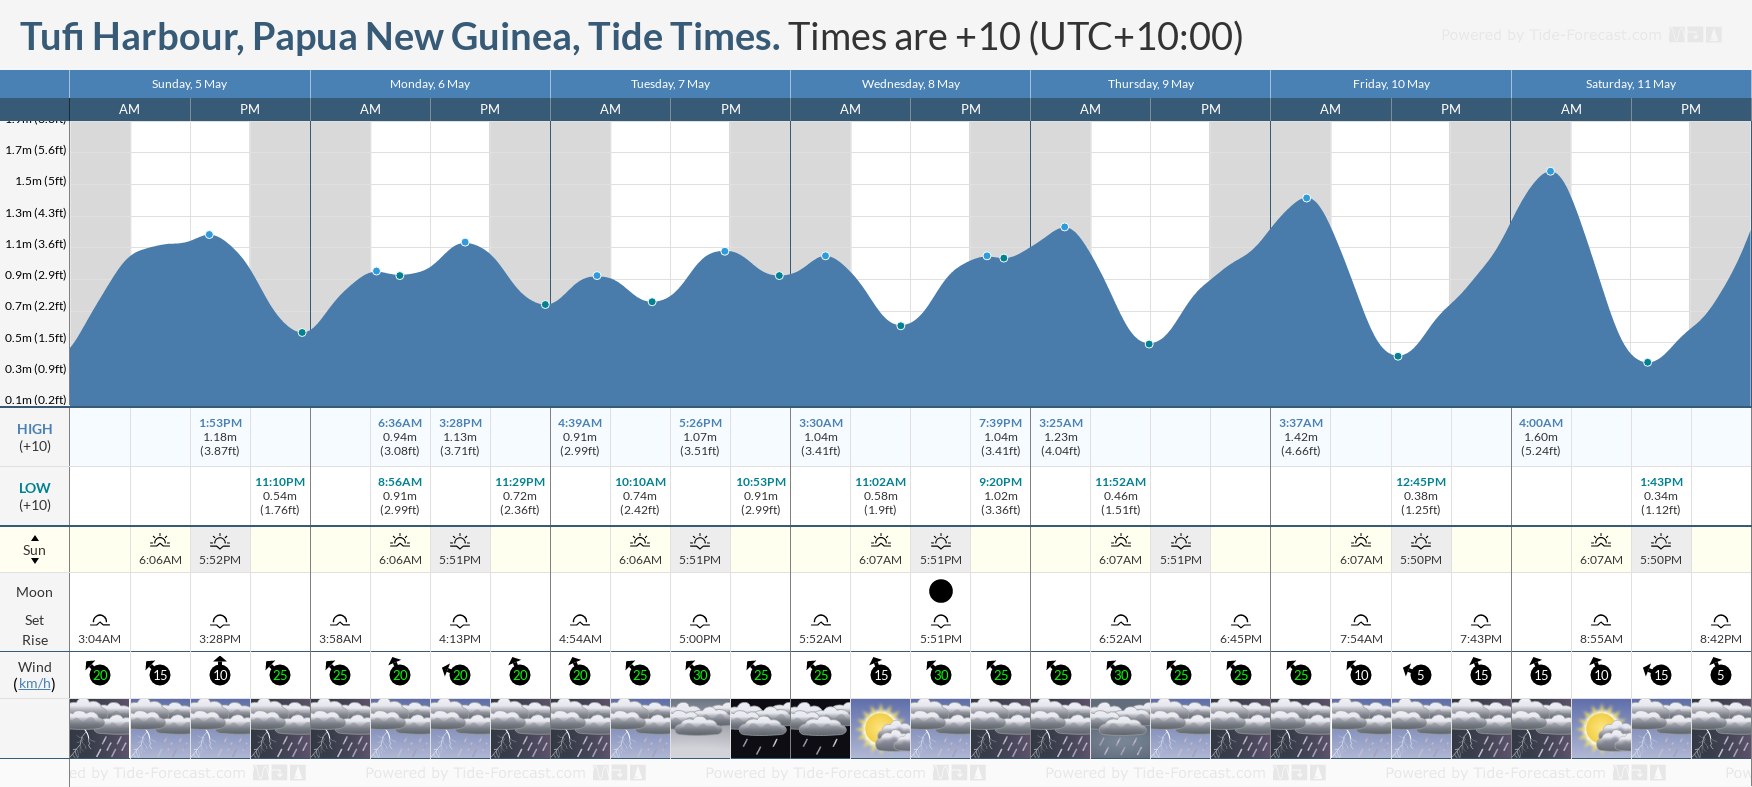 Tufi Harbour, Papua New Guinea Tide Chart including high and low tide times for the next 7 days